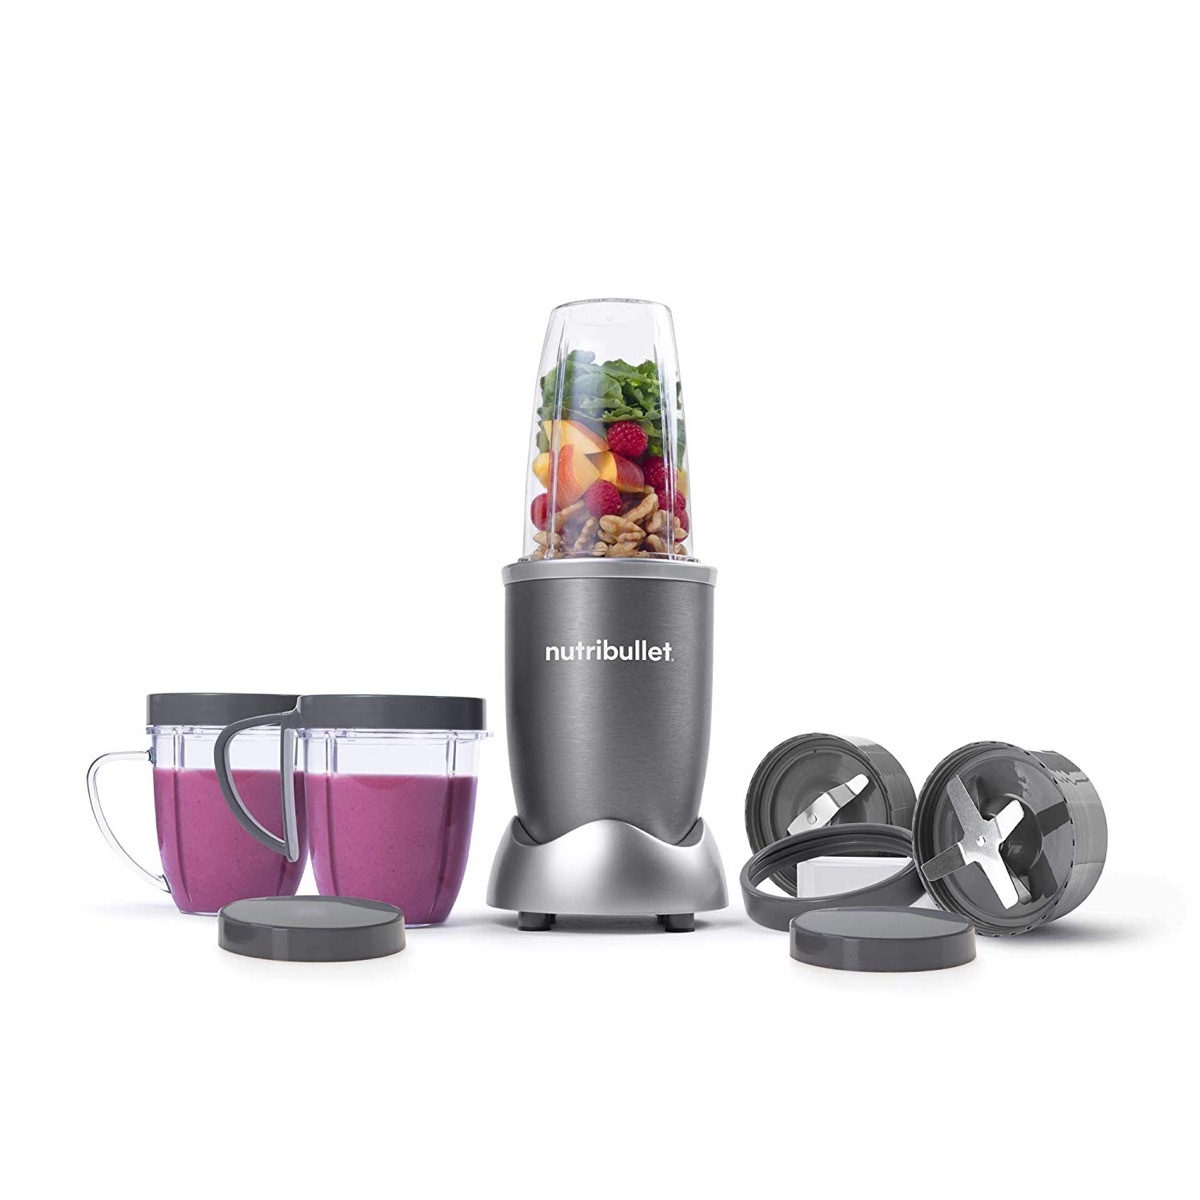 nutribullet blender with two cups, two blades, and additional lids